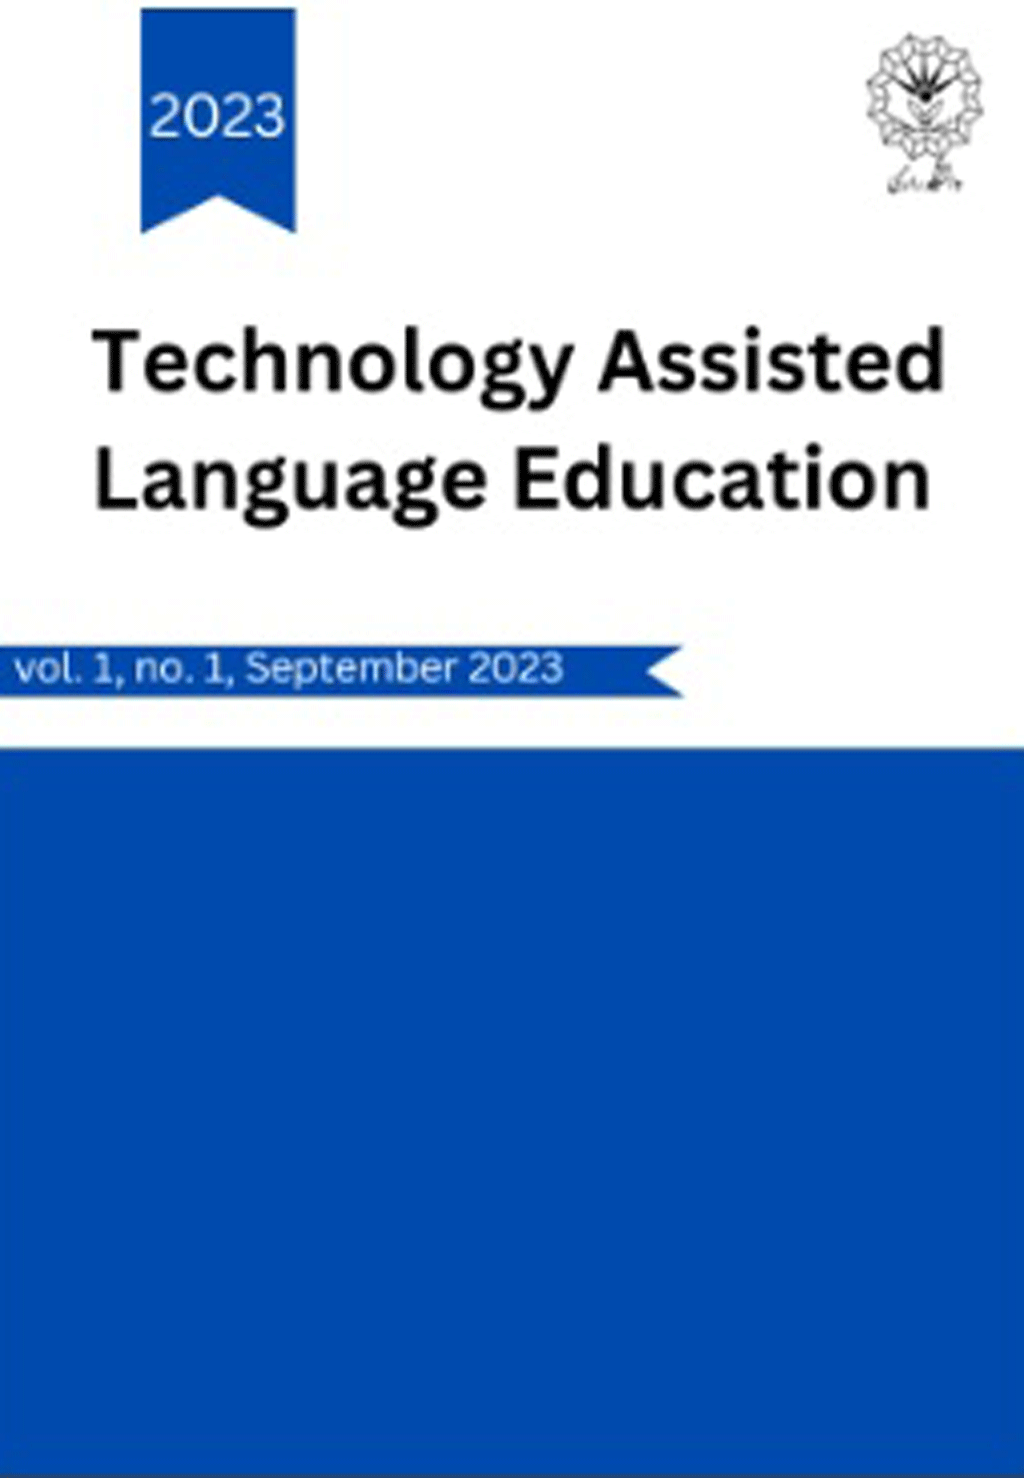 Technology Assisted Language Education - October 2023, Volume 1 - Number 2